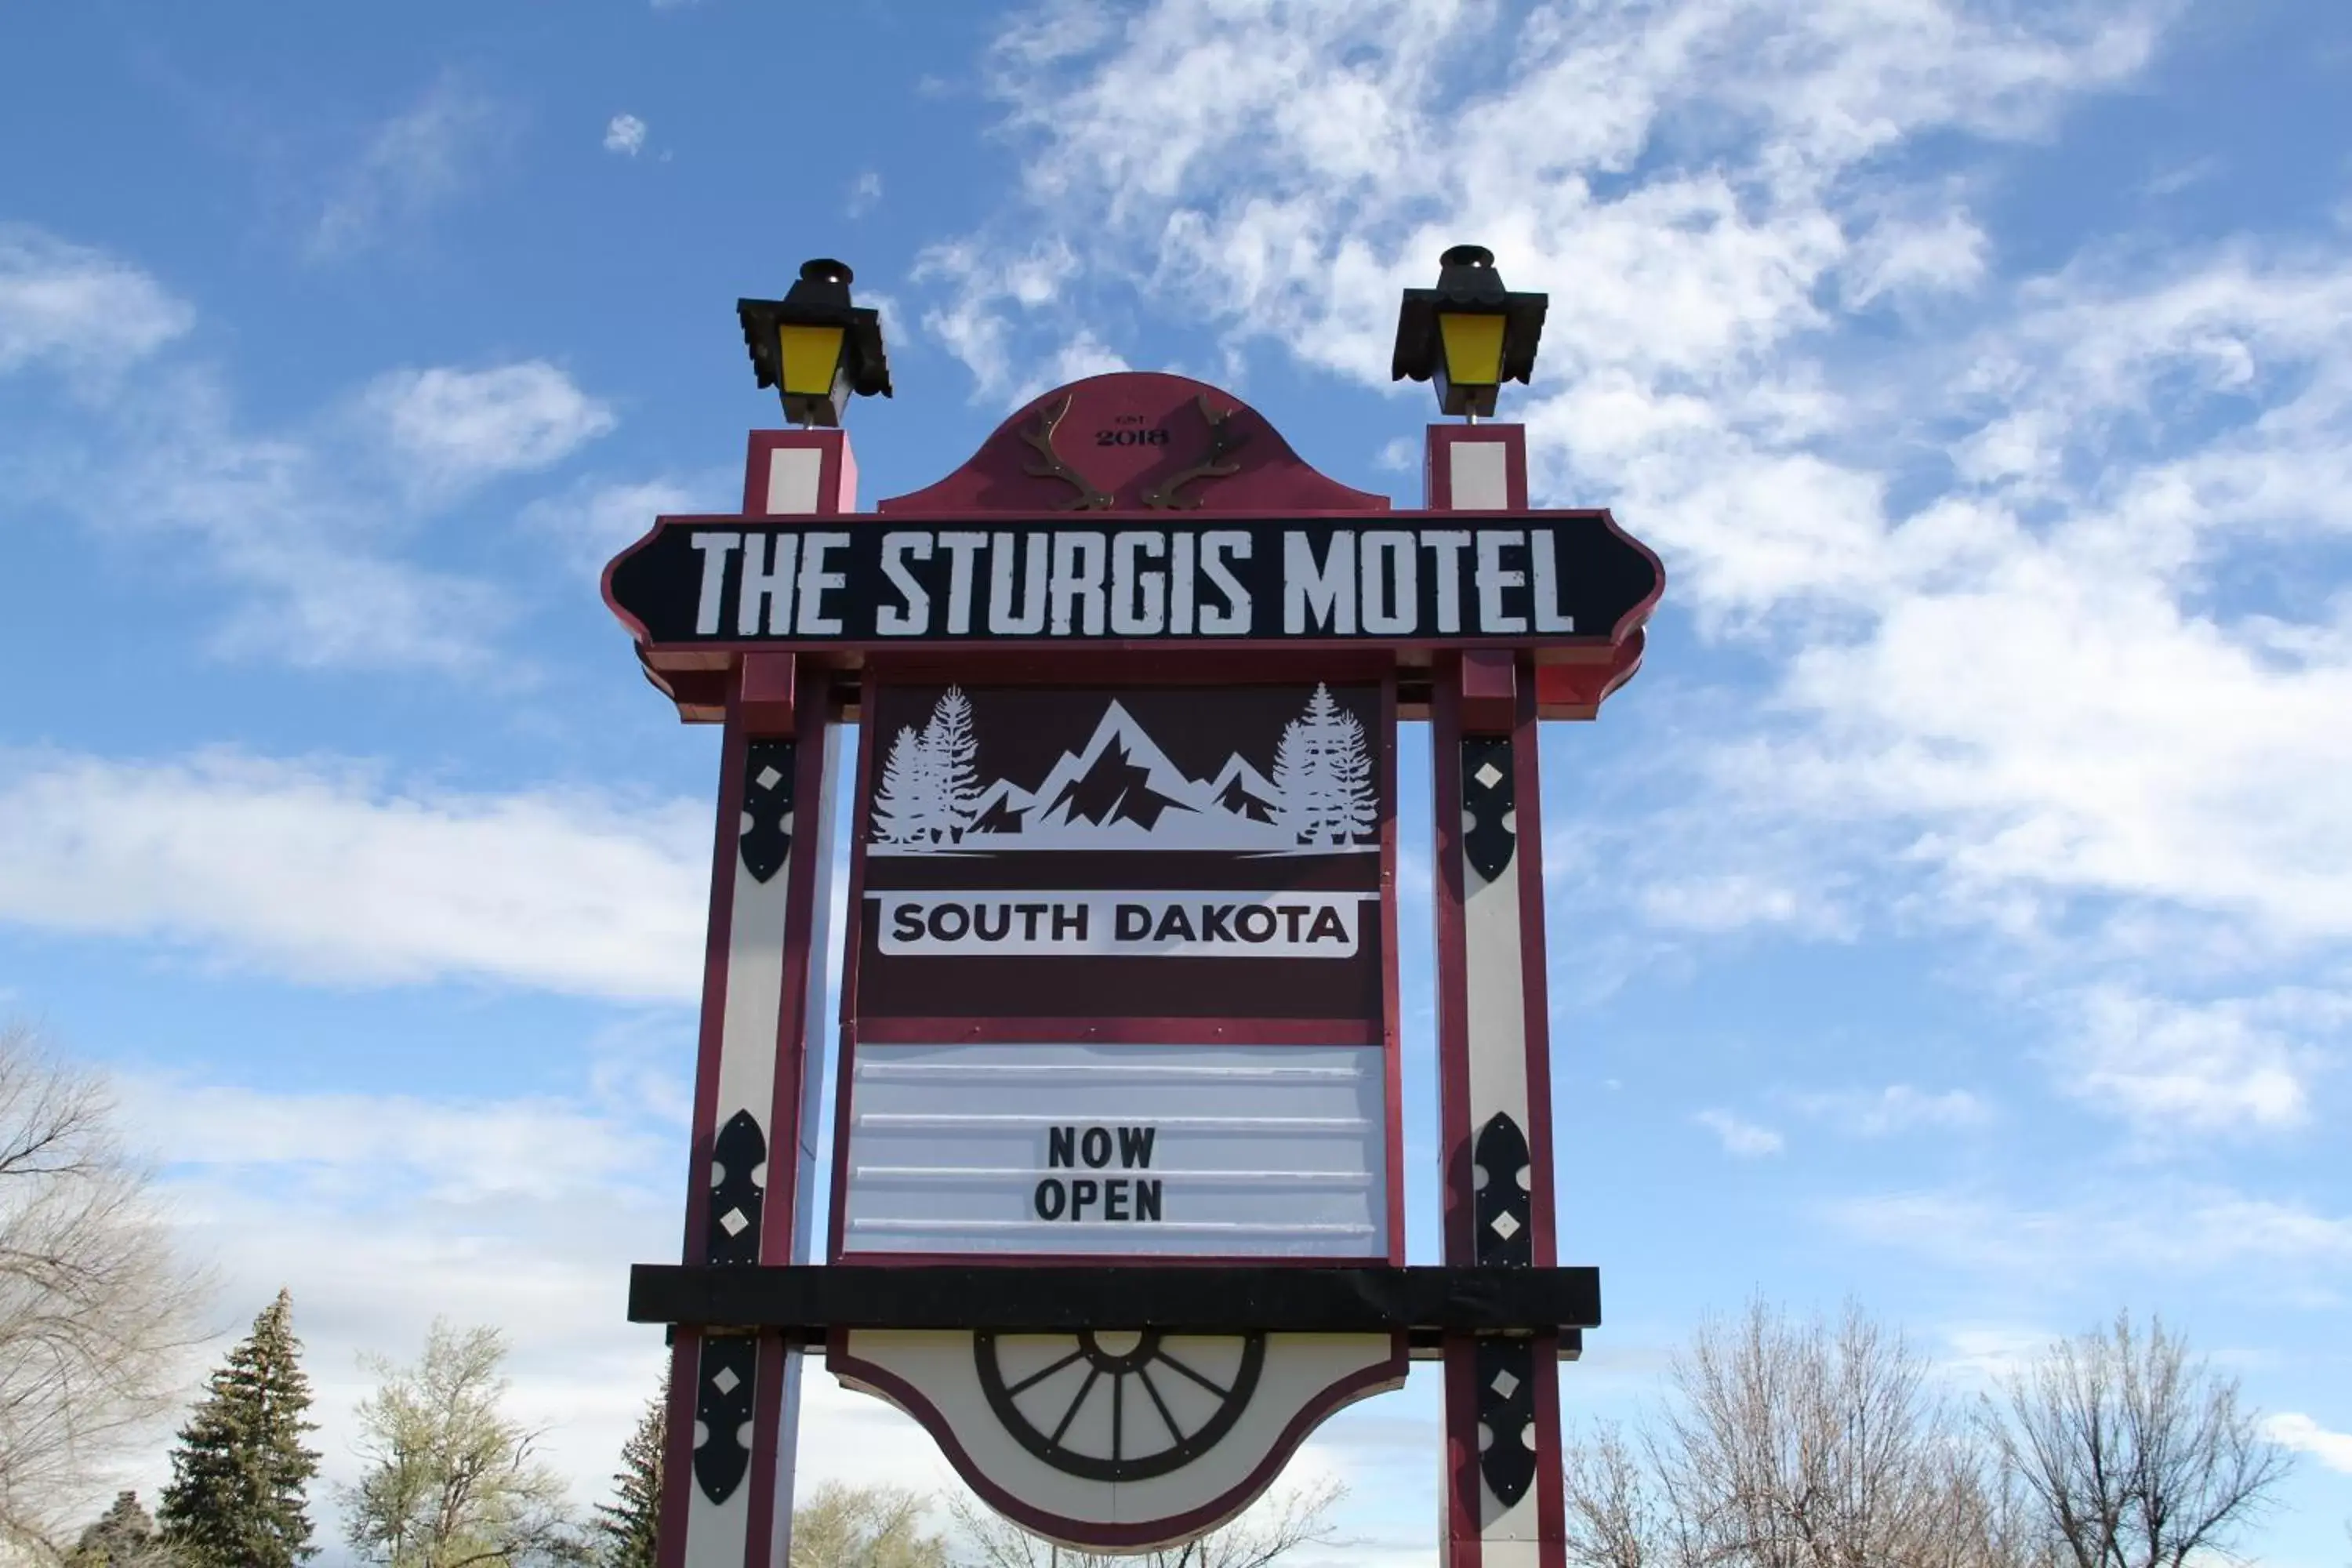 Property logo or sign in The Sturgis Motel